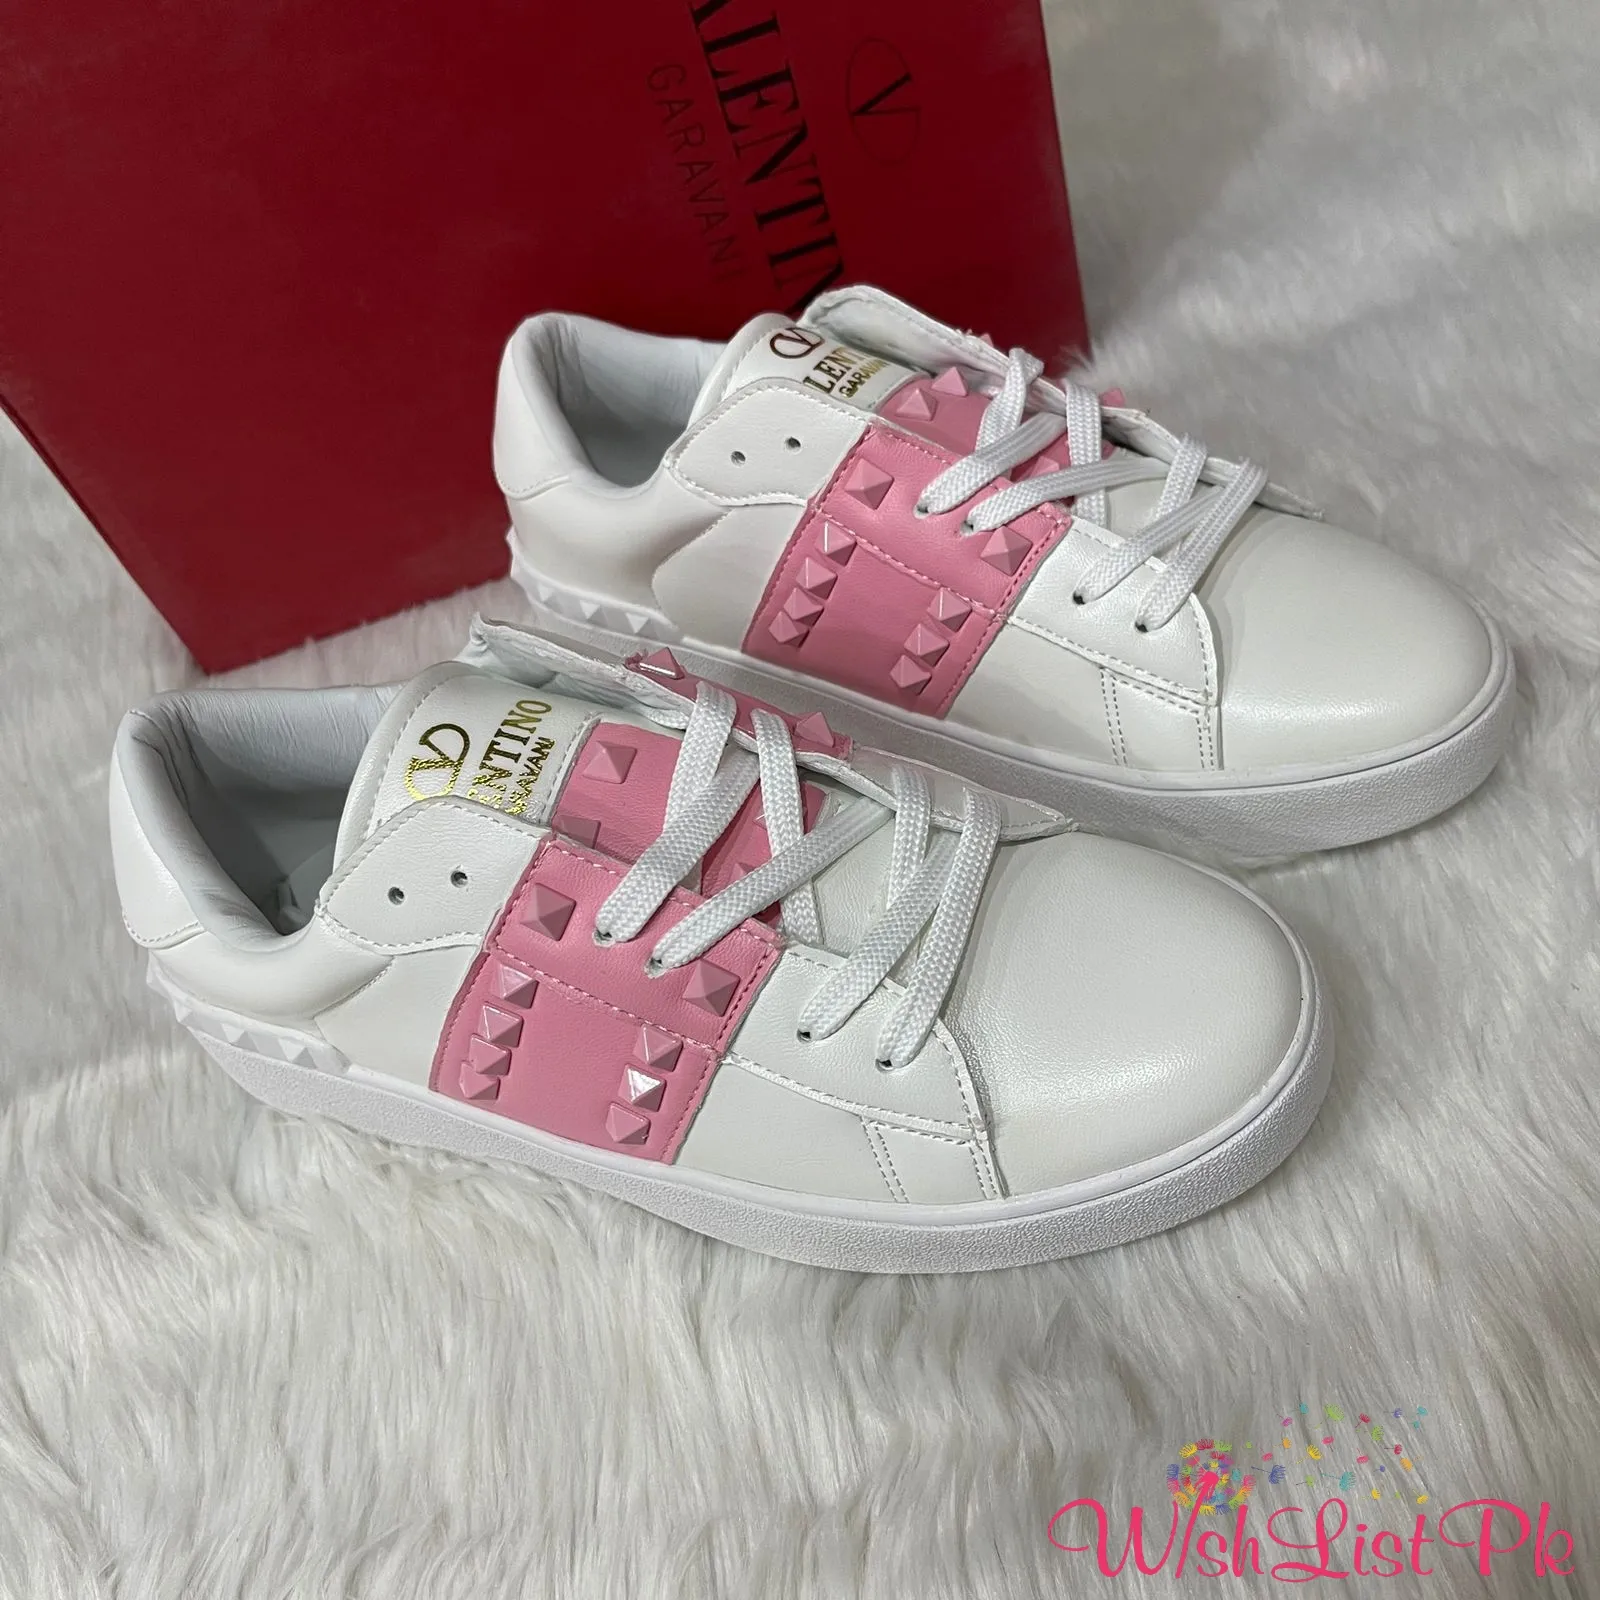 Best Price Valentino Pink Shoes